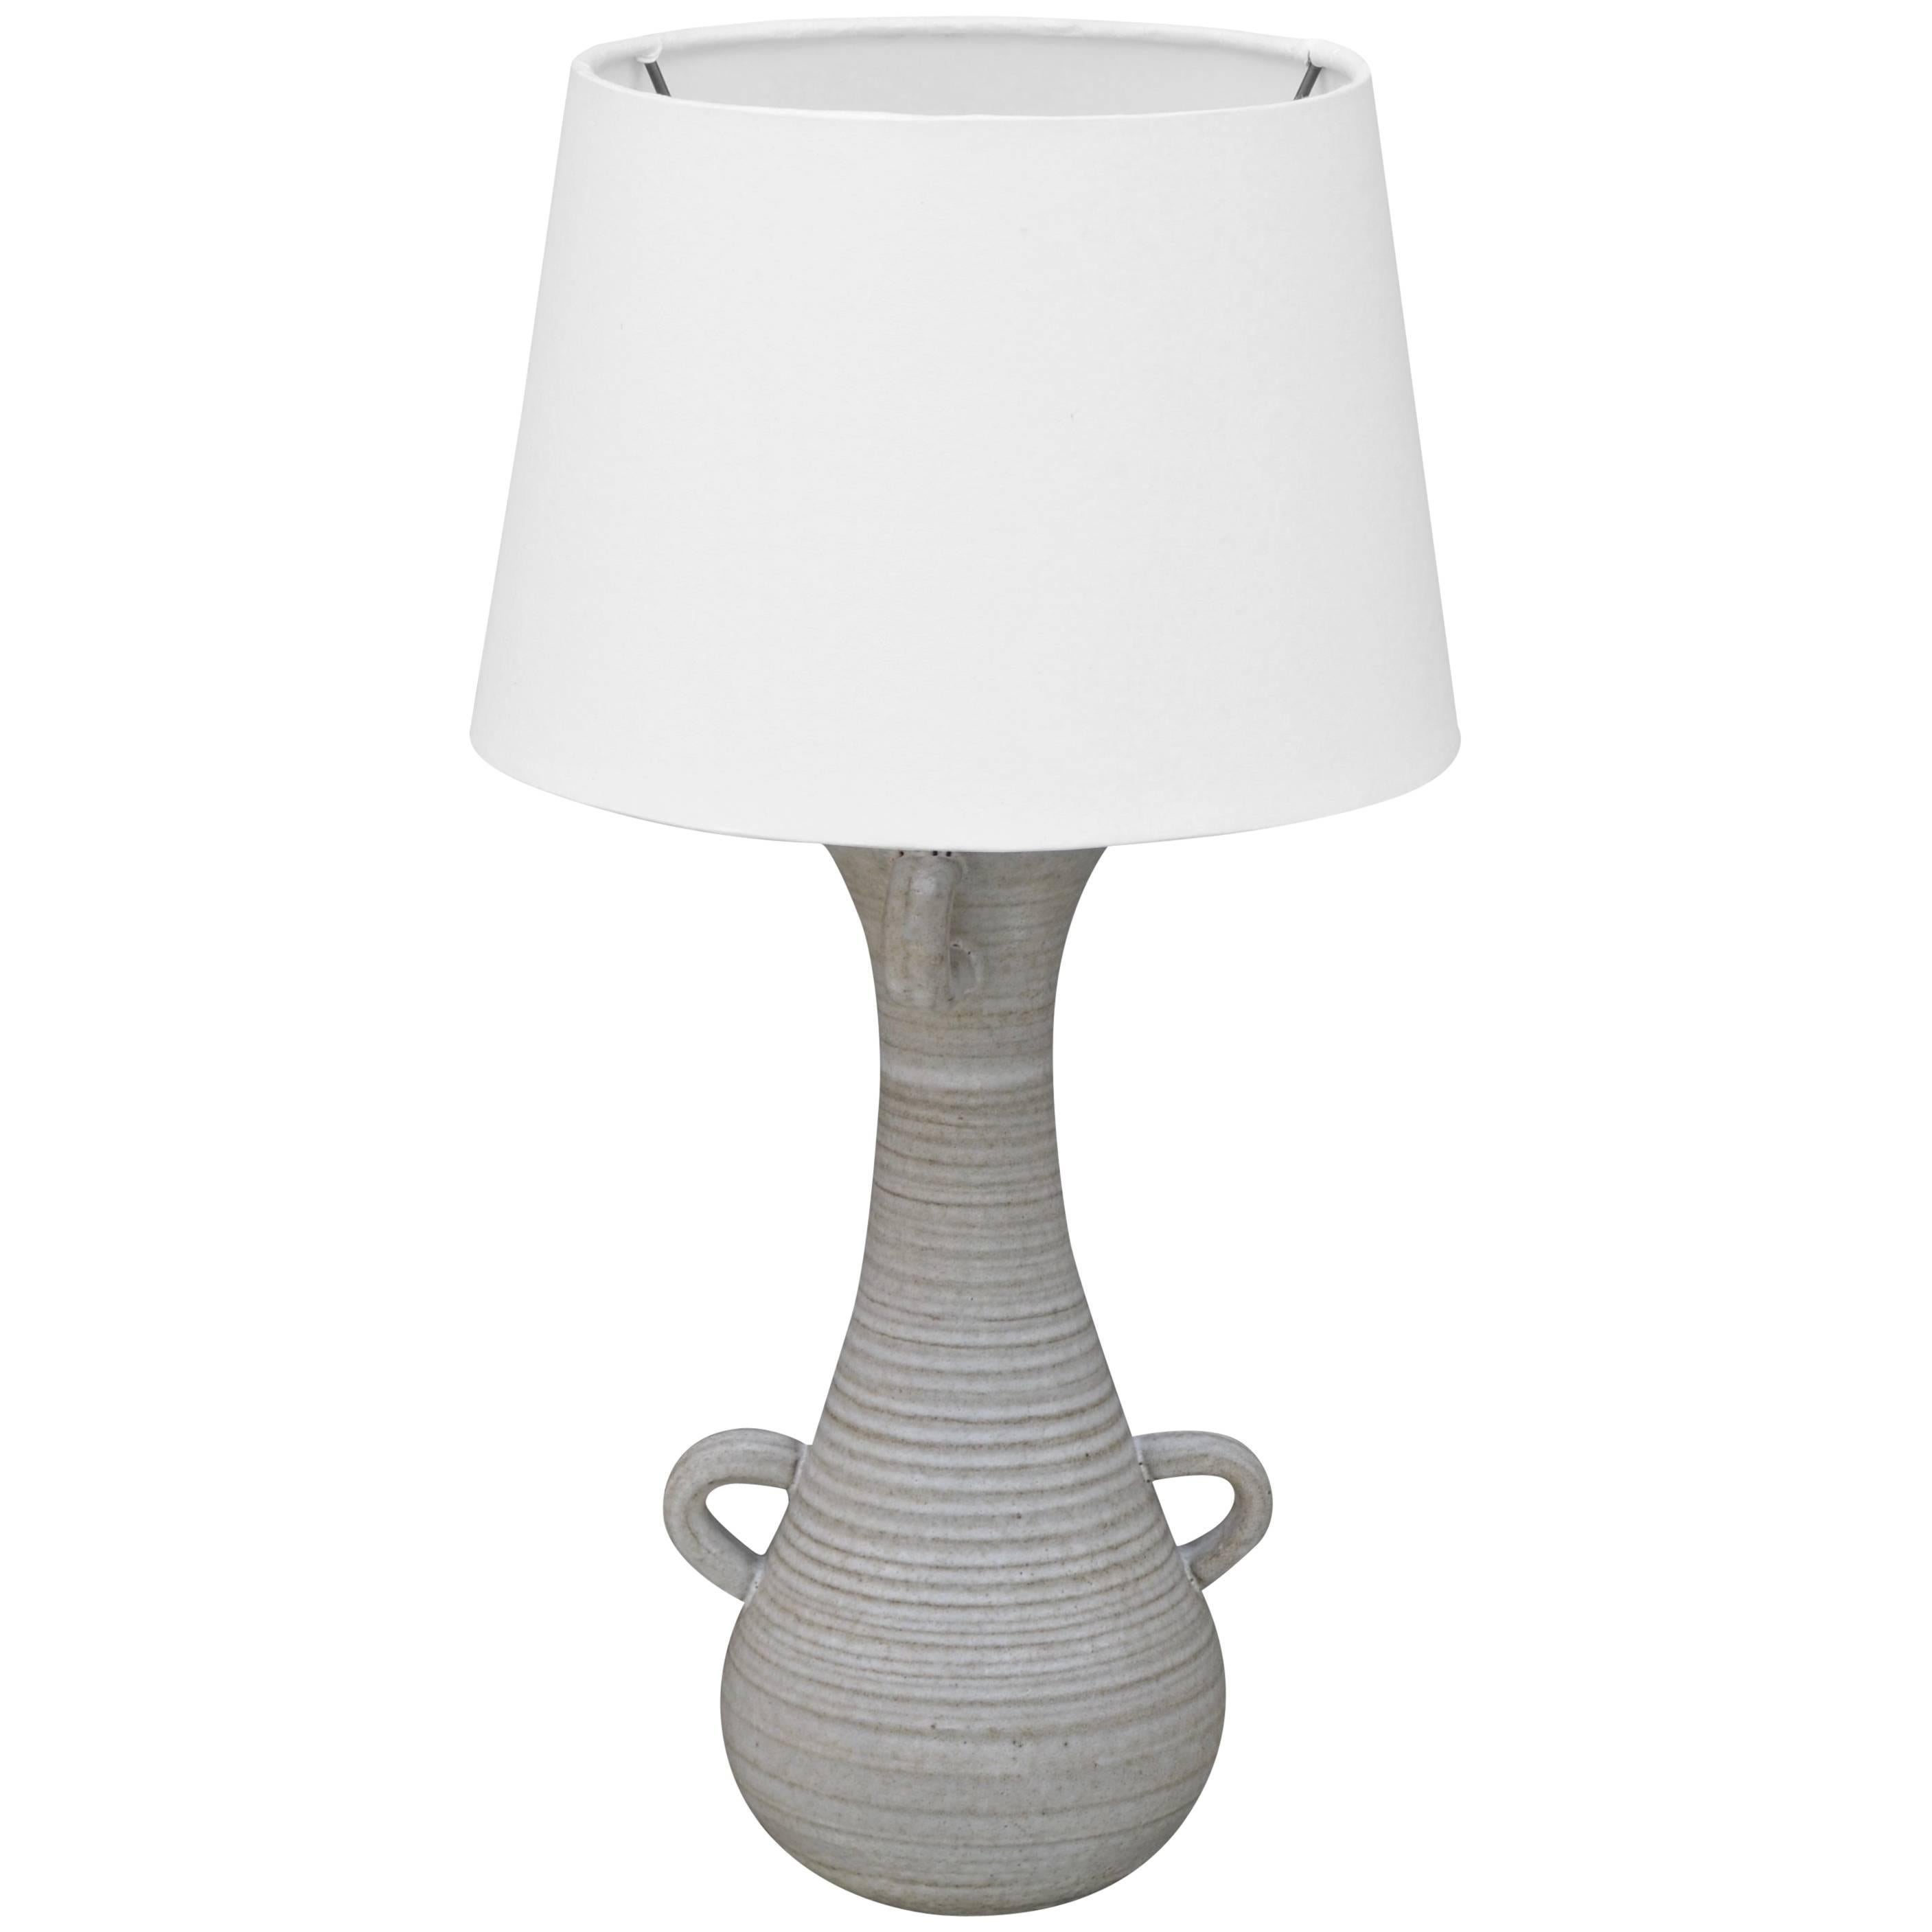 Chic Gourd Shaped Table Lamp with Custom White Parchment Shade